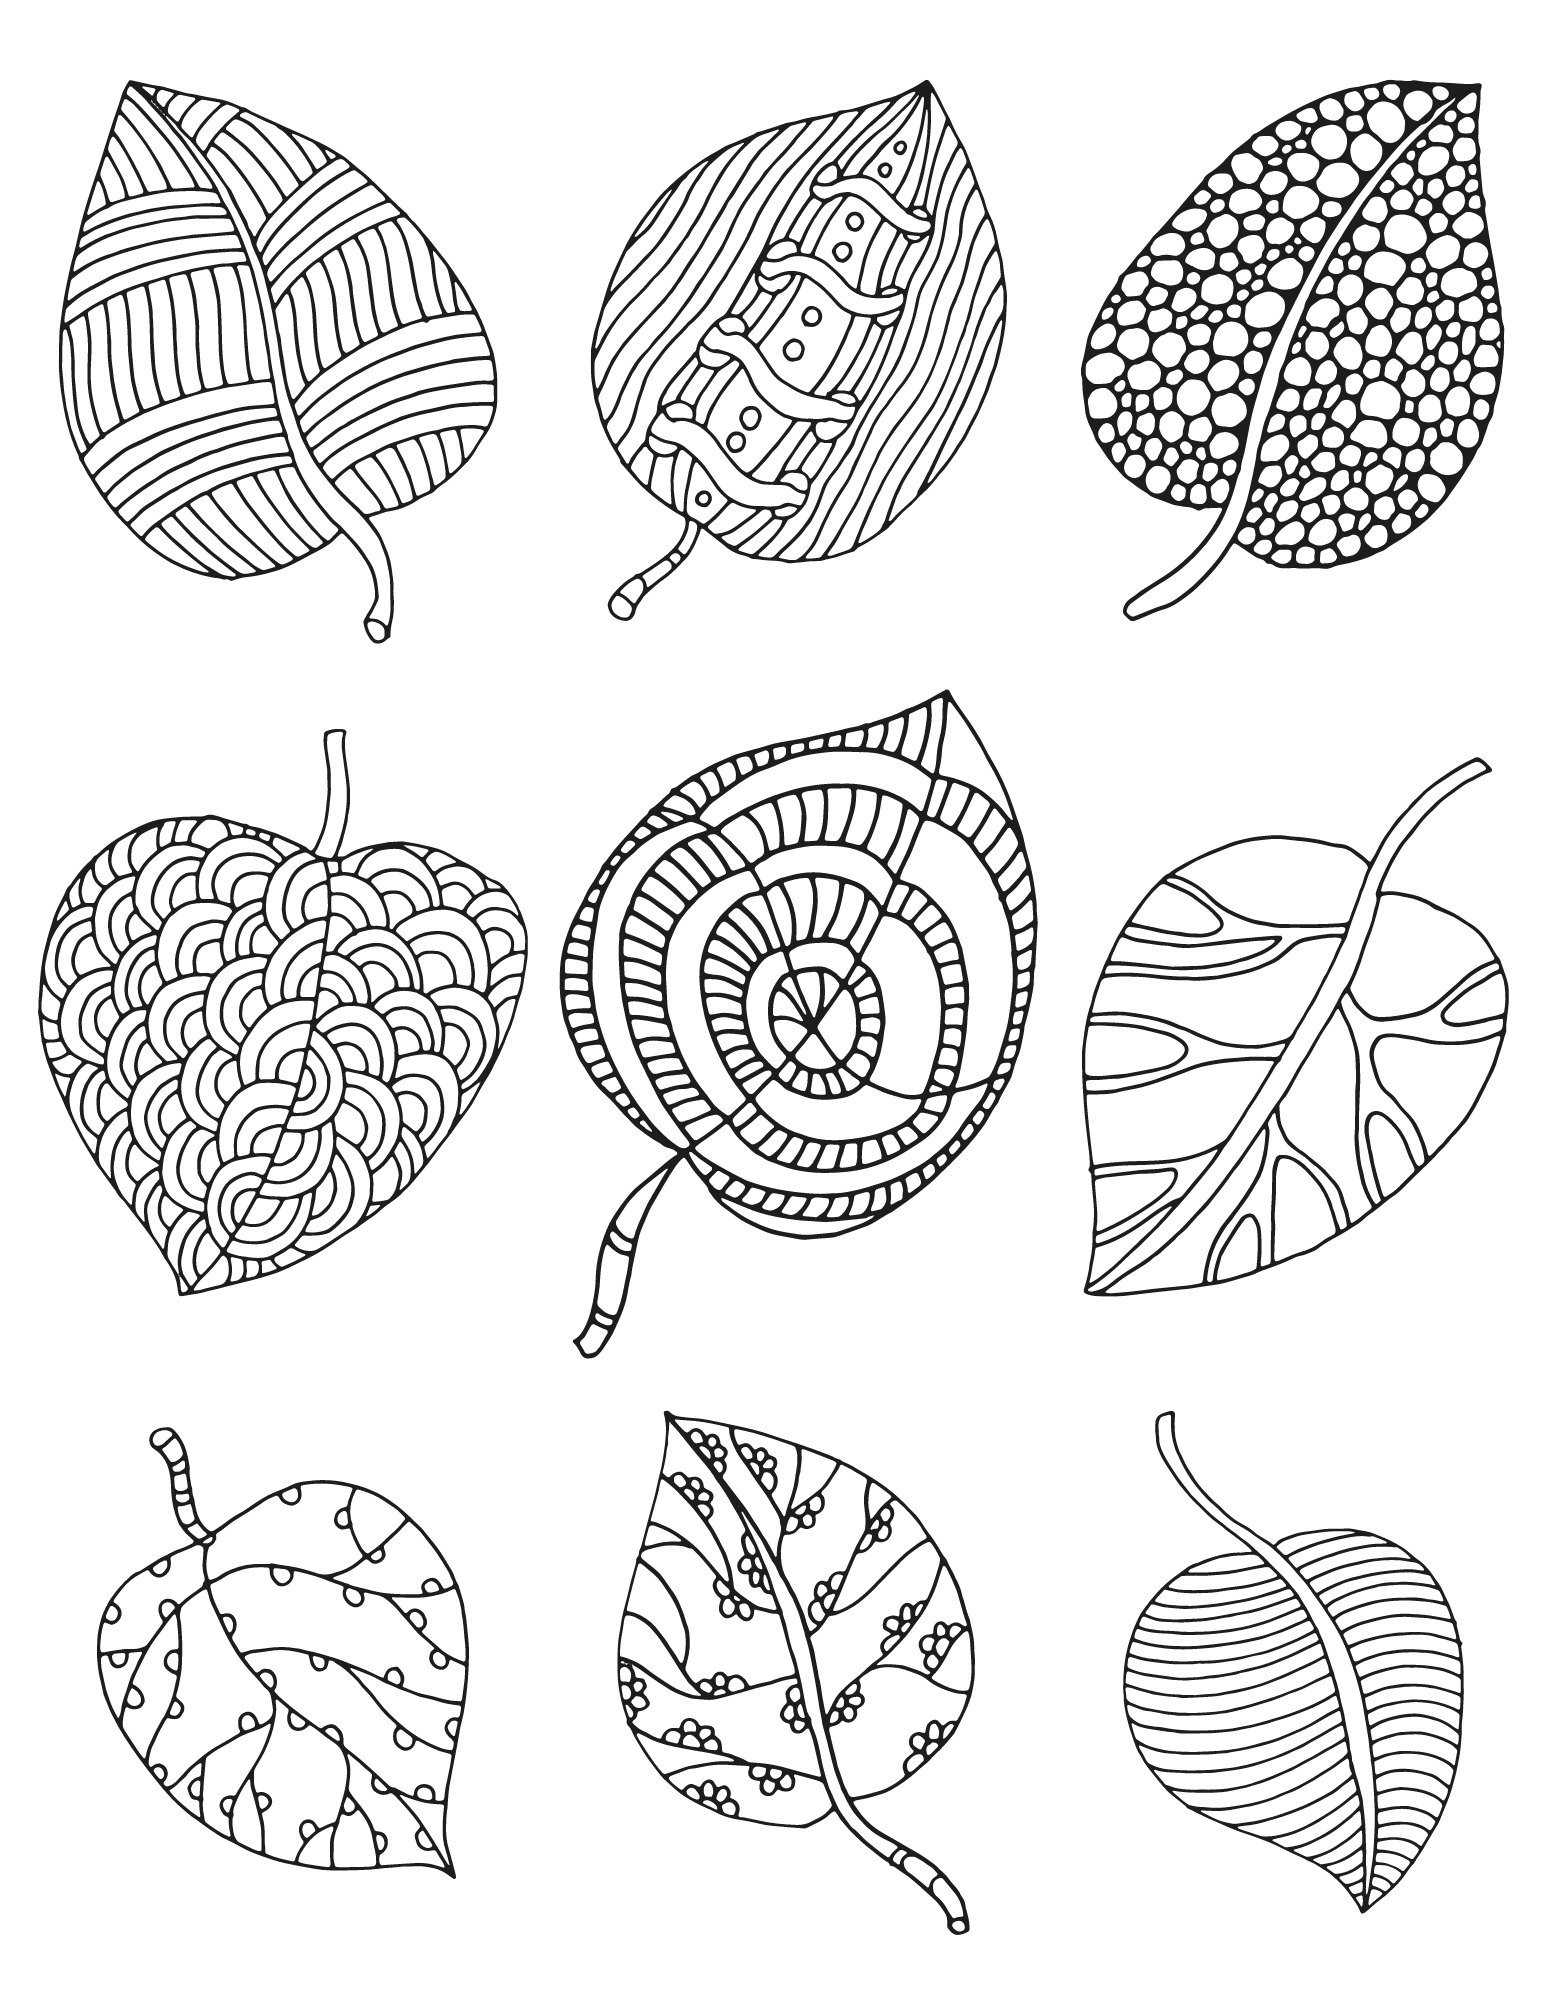 Fun fall leaves coloring pages for kids and adults